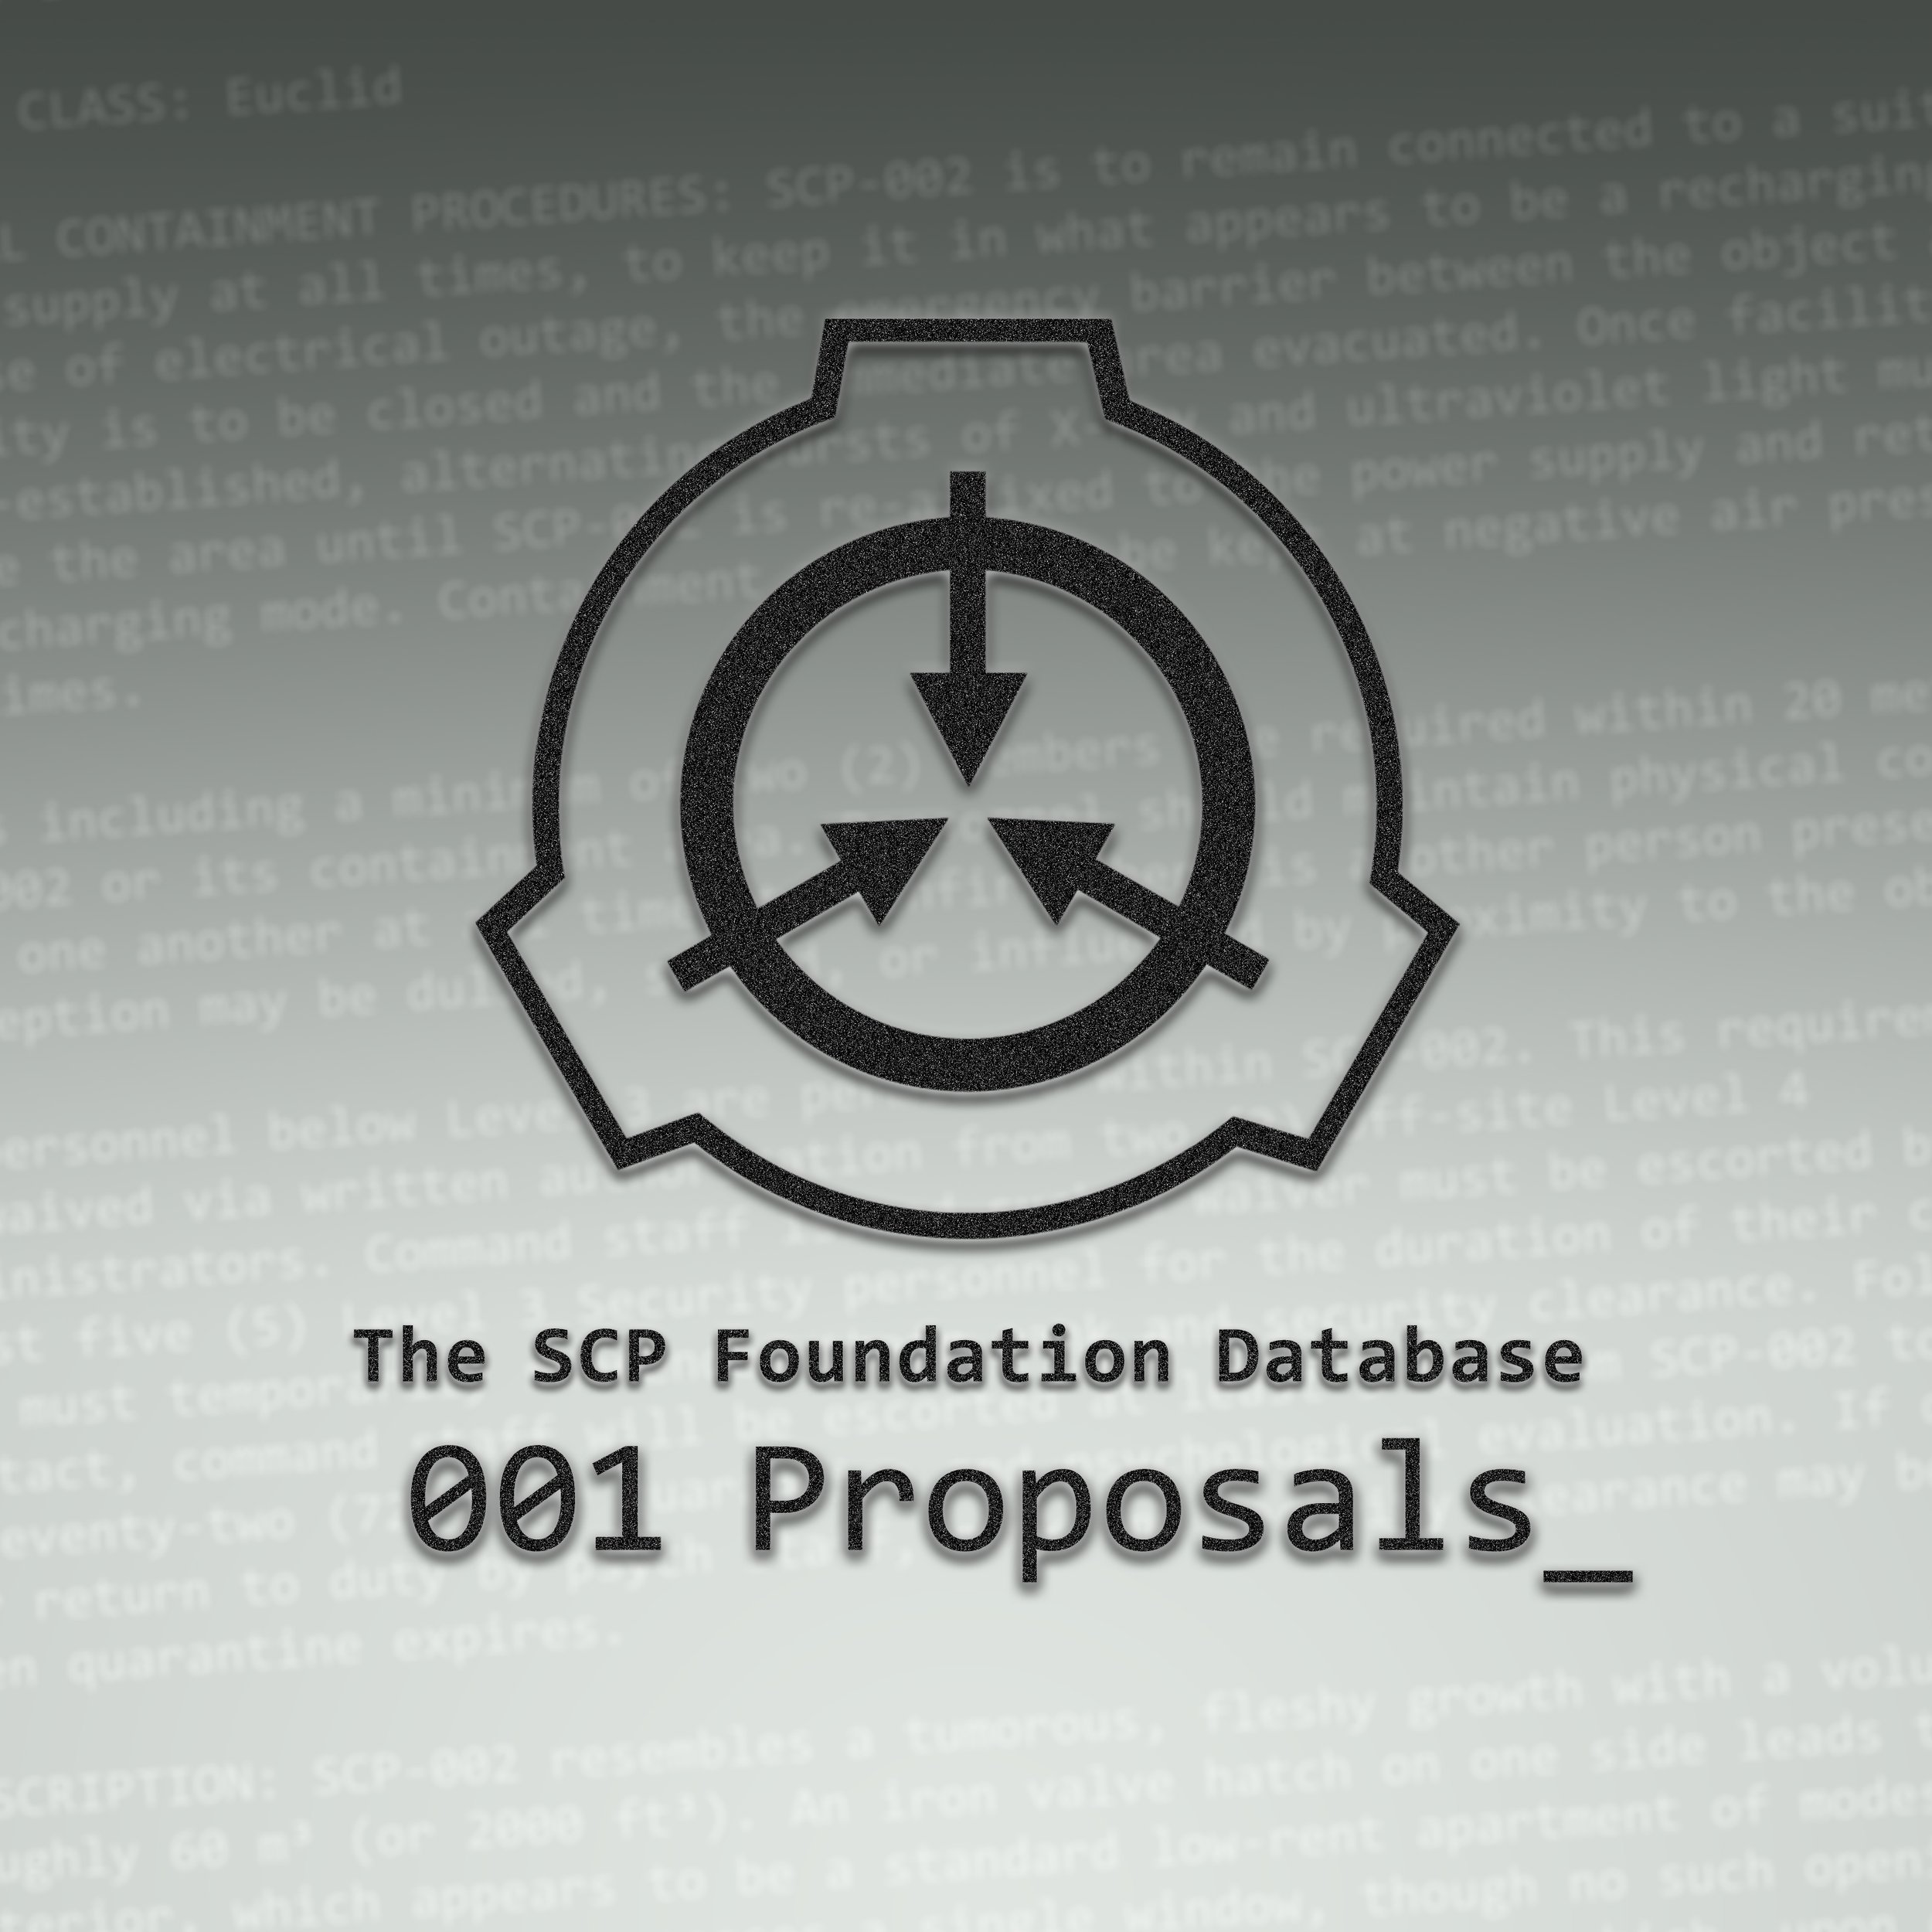 SCP Classifications Explained - Learn About SCP Foundation: All SCP  Archives in Order (podcast)